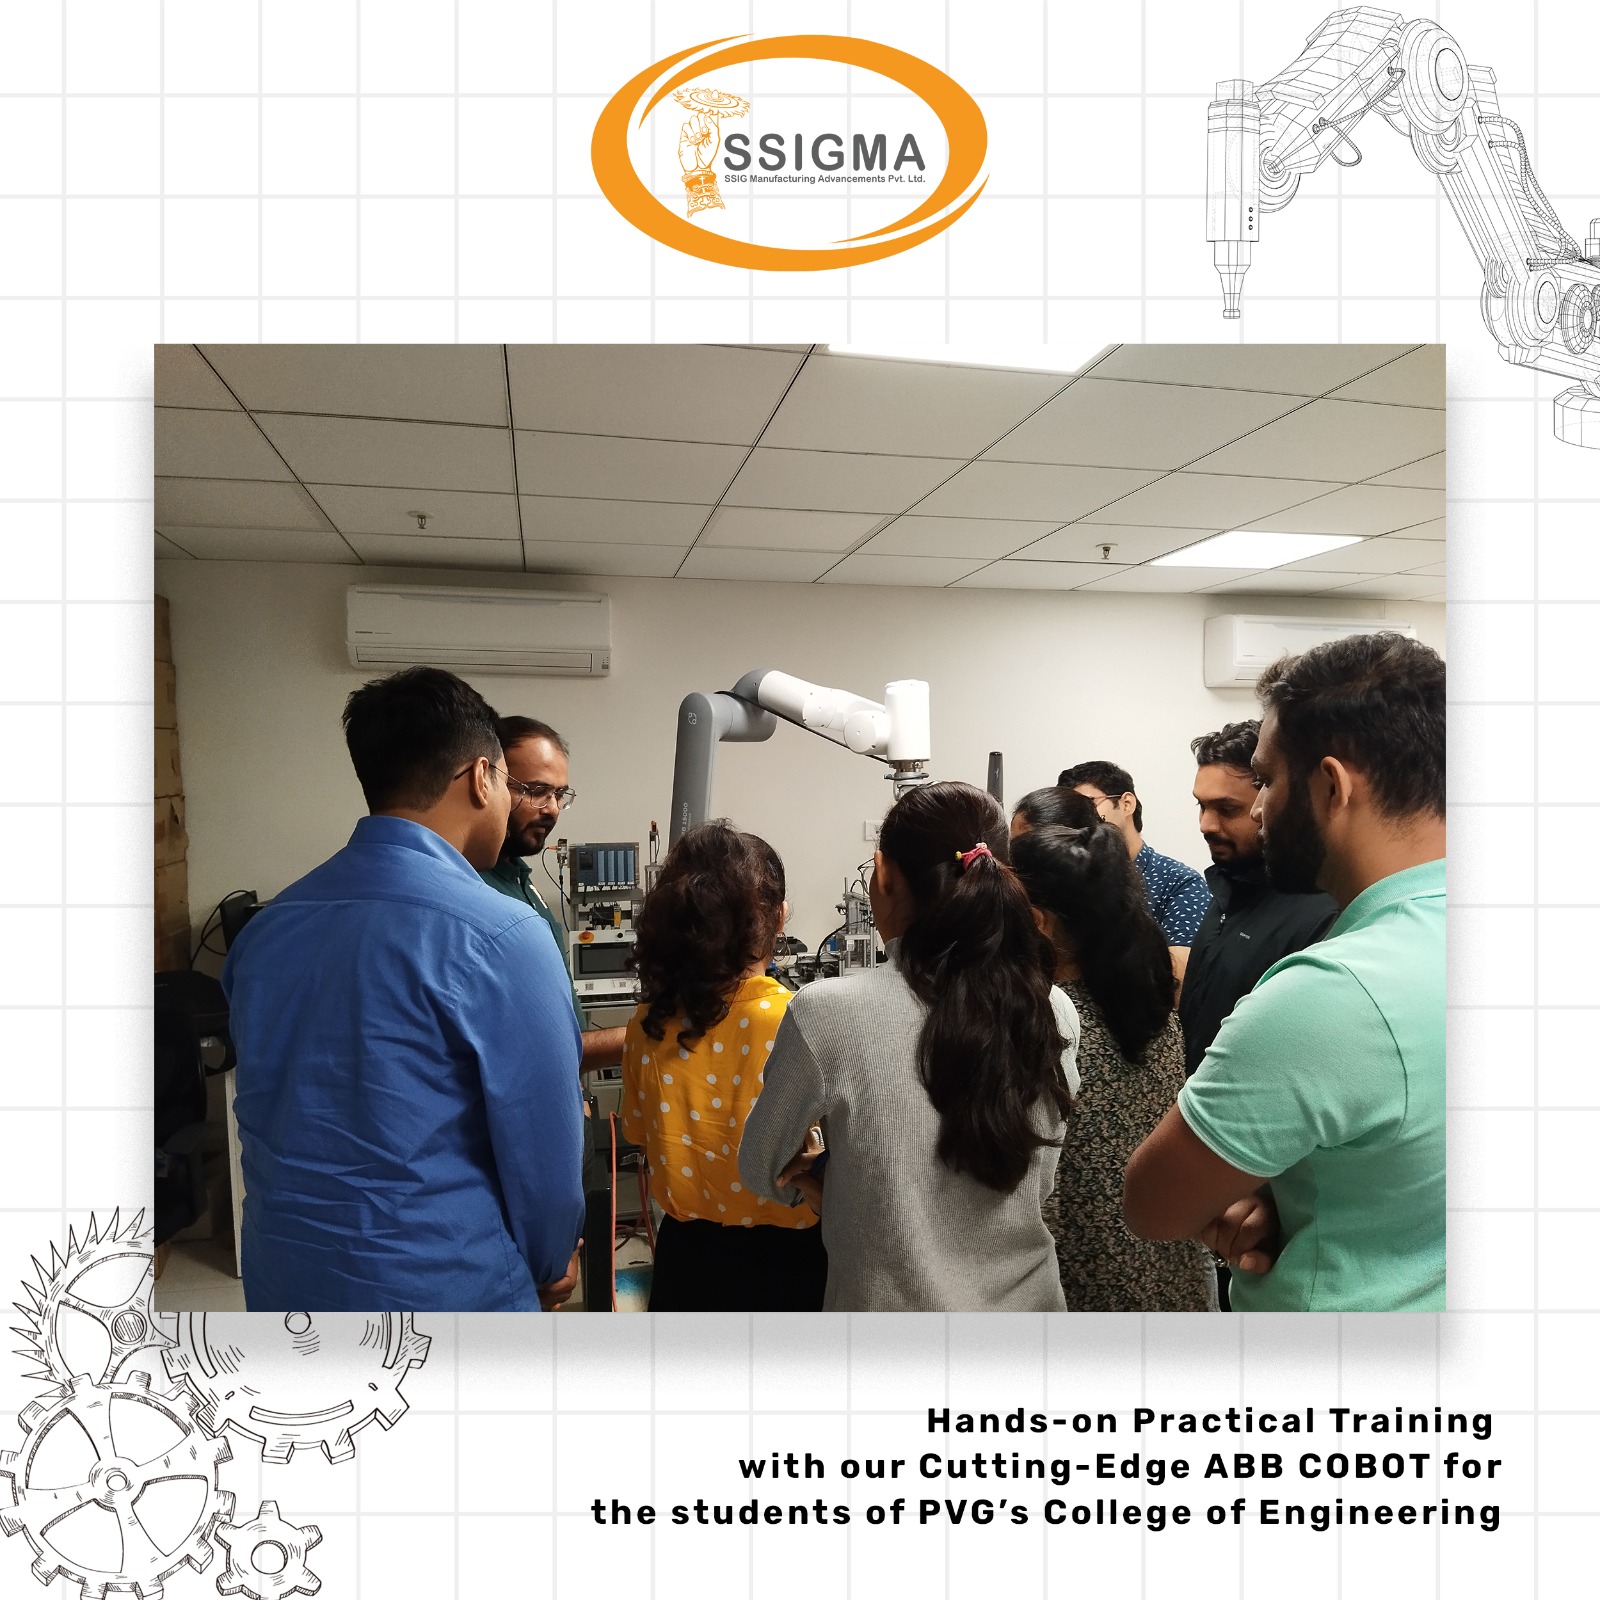 ssigma-hand-on-industrial-training